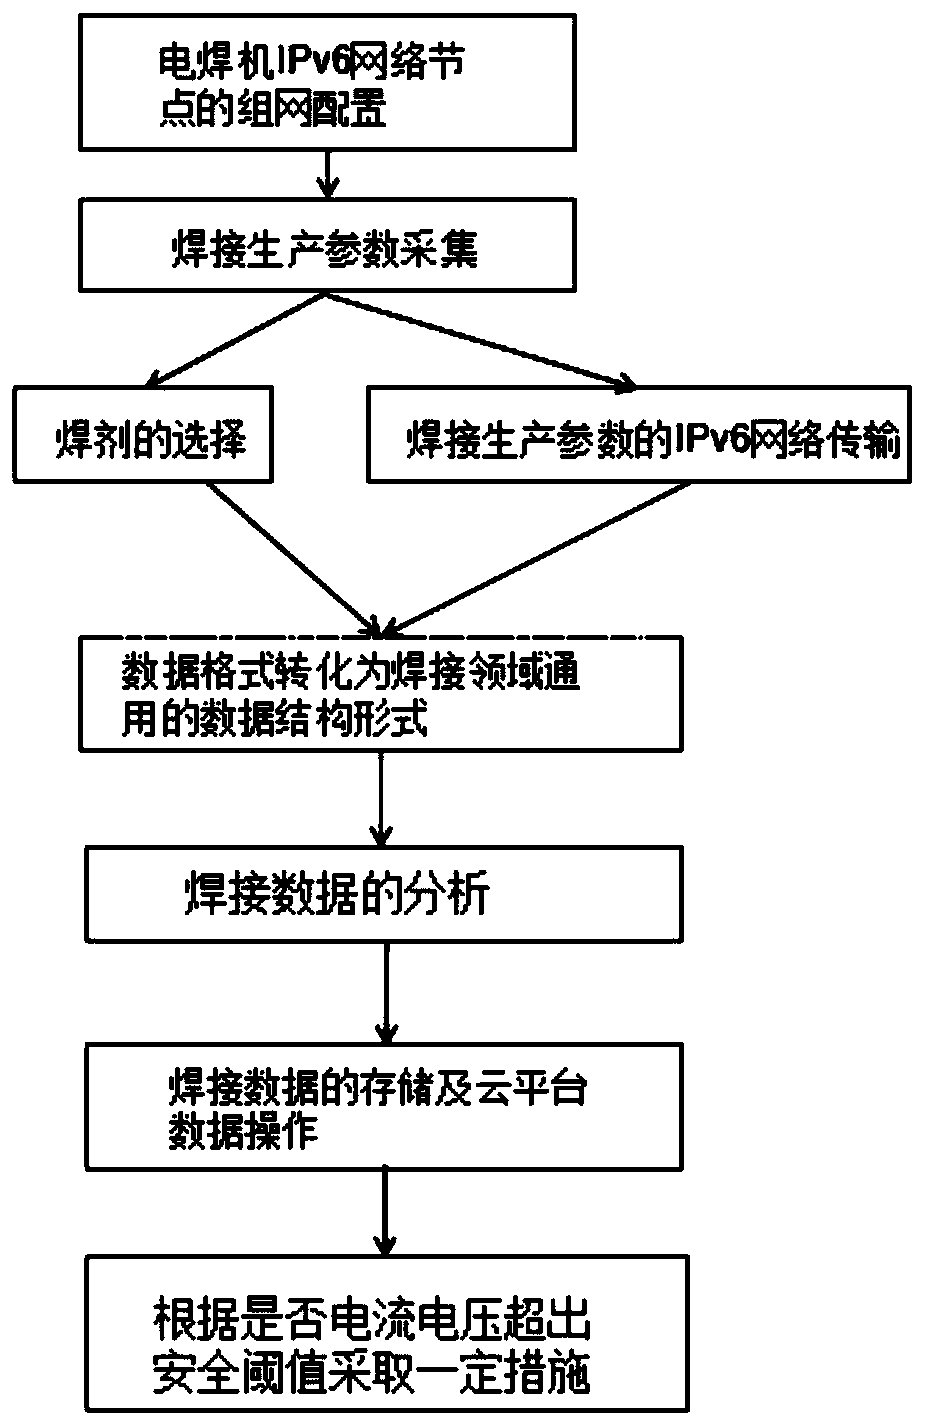 Electric welding machine cluster monitoring control method based on IPv6